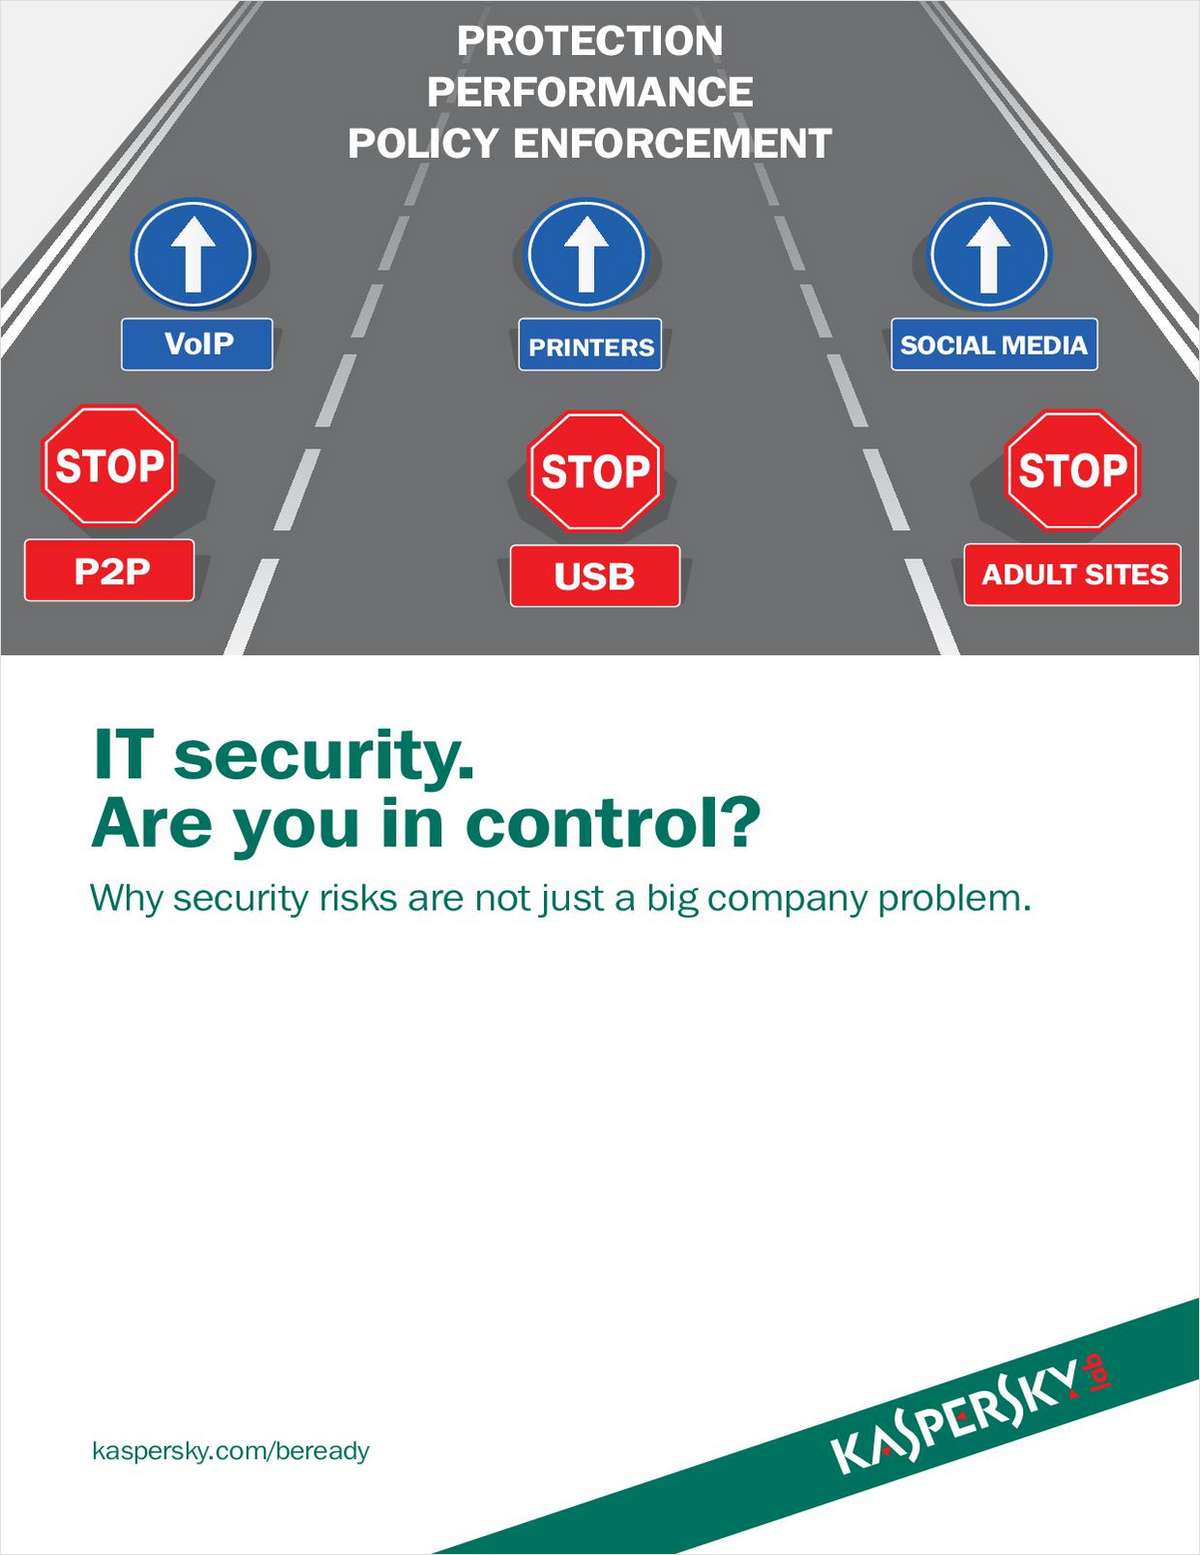 IT Security. Are you in Control?